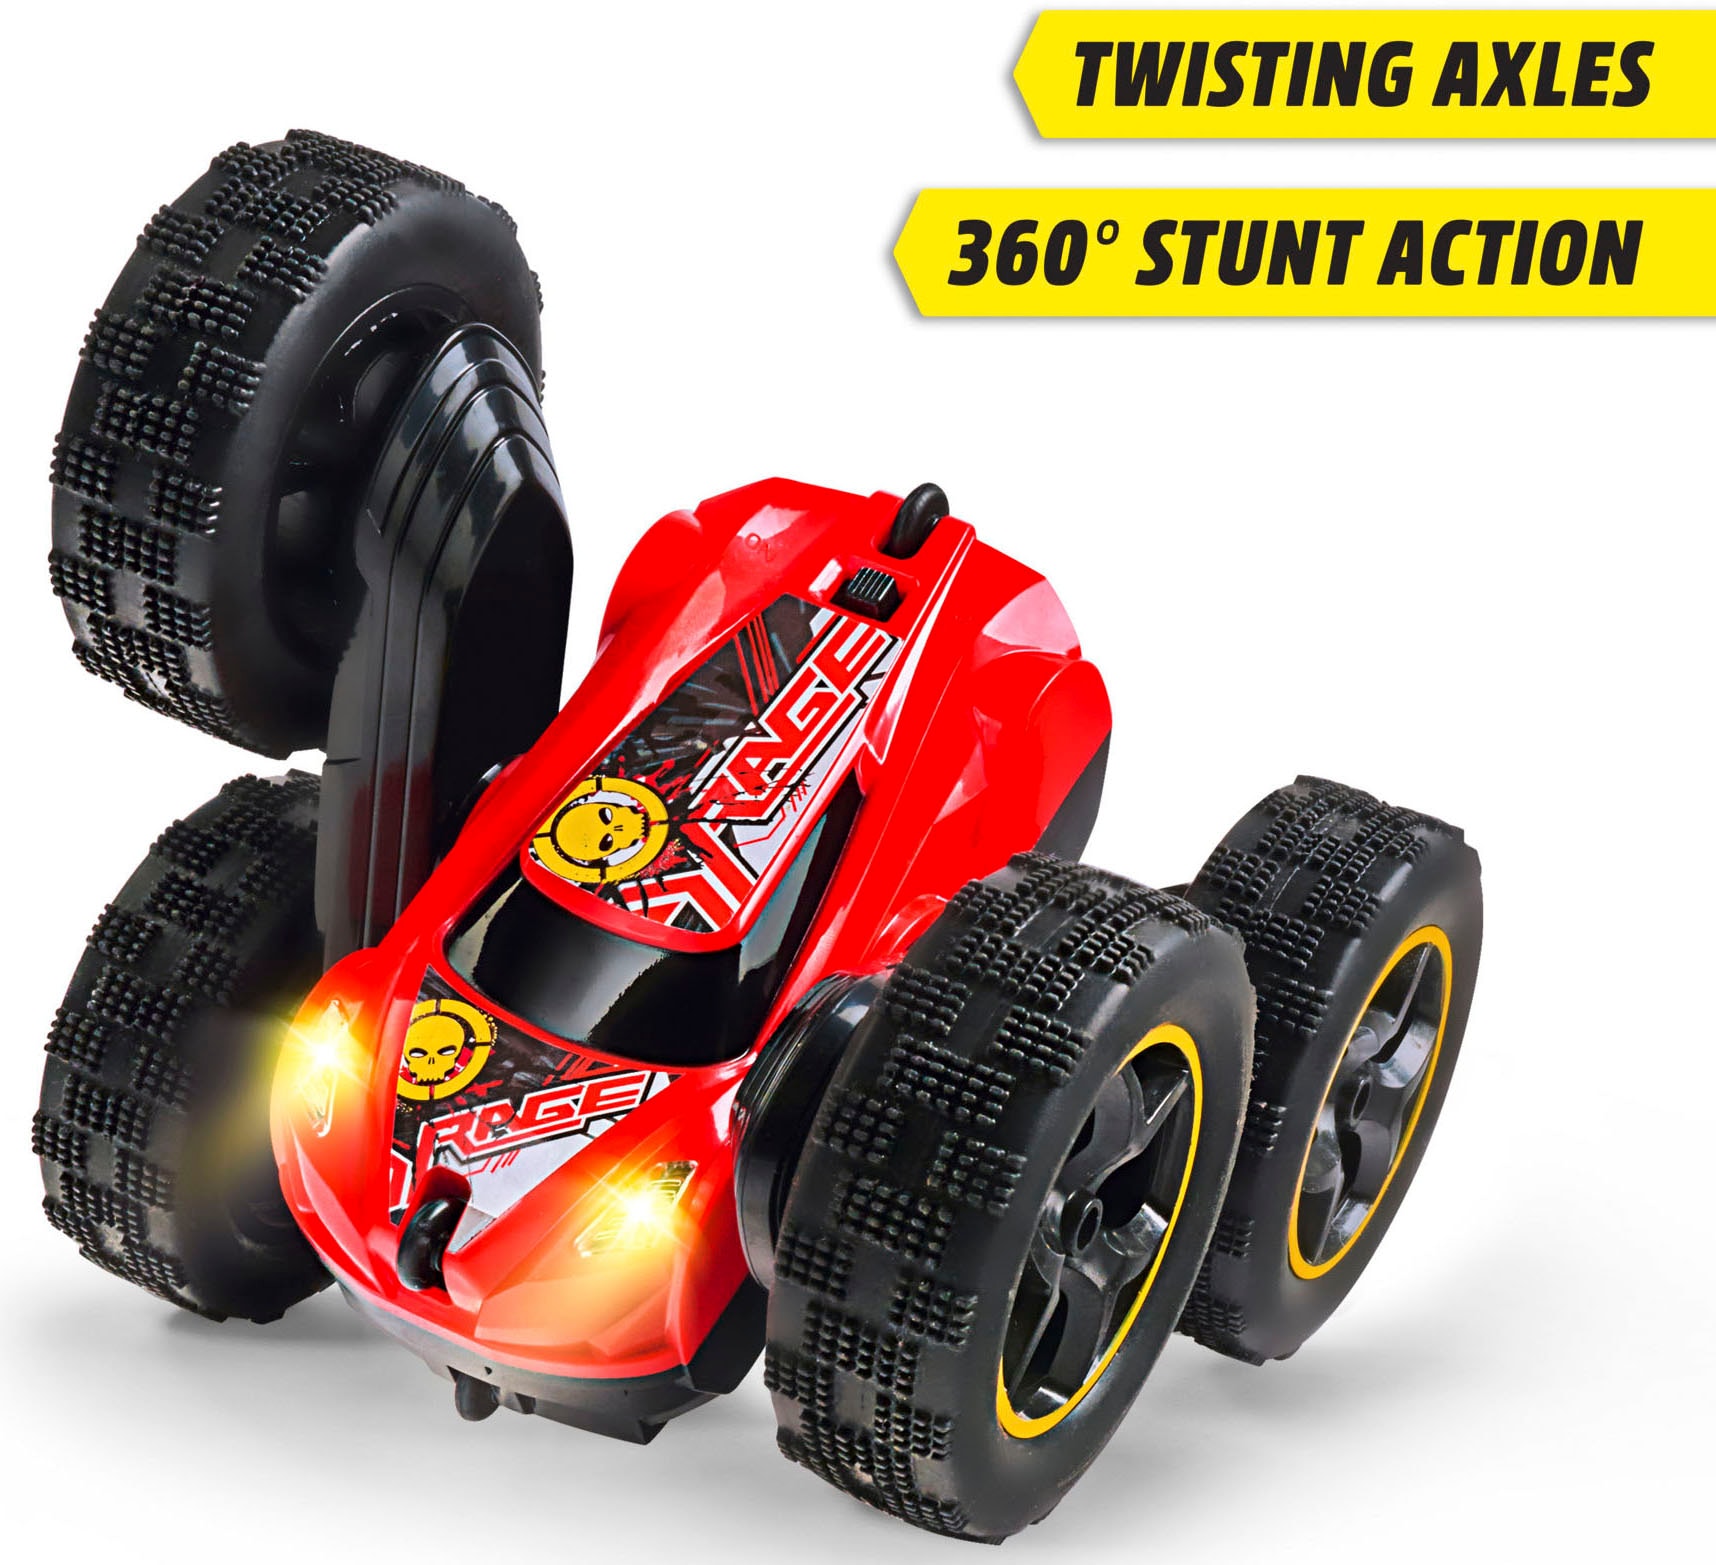 Dickie Toys RC-Auto »Tumbling Flippy«, mit Lichtfunktion